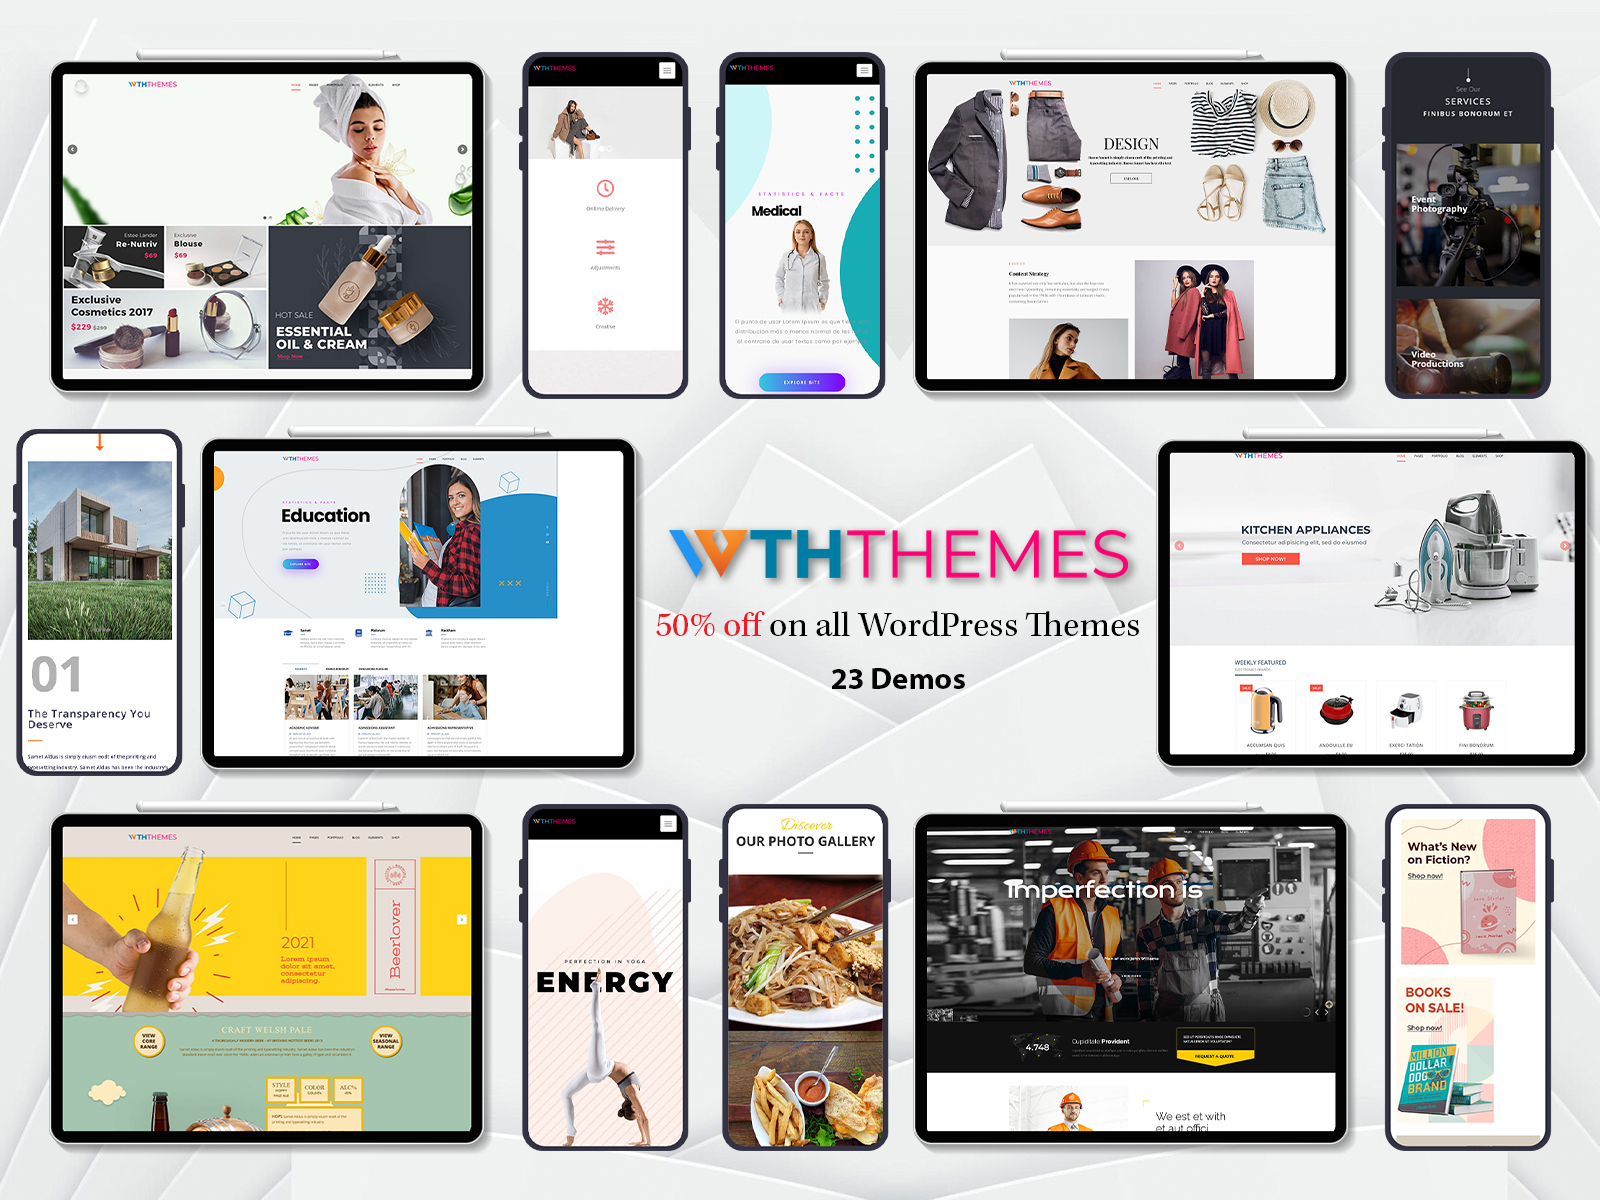 Upgrade Your Business Website With New WordPress Theme